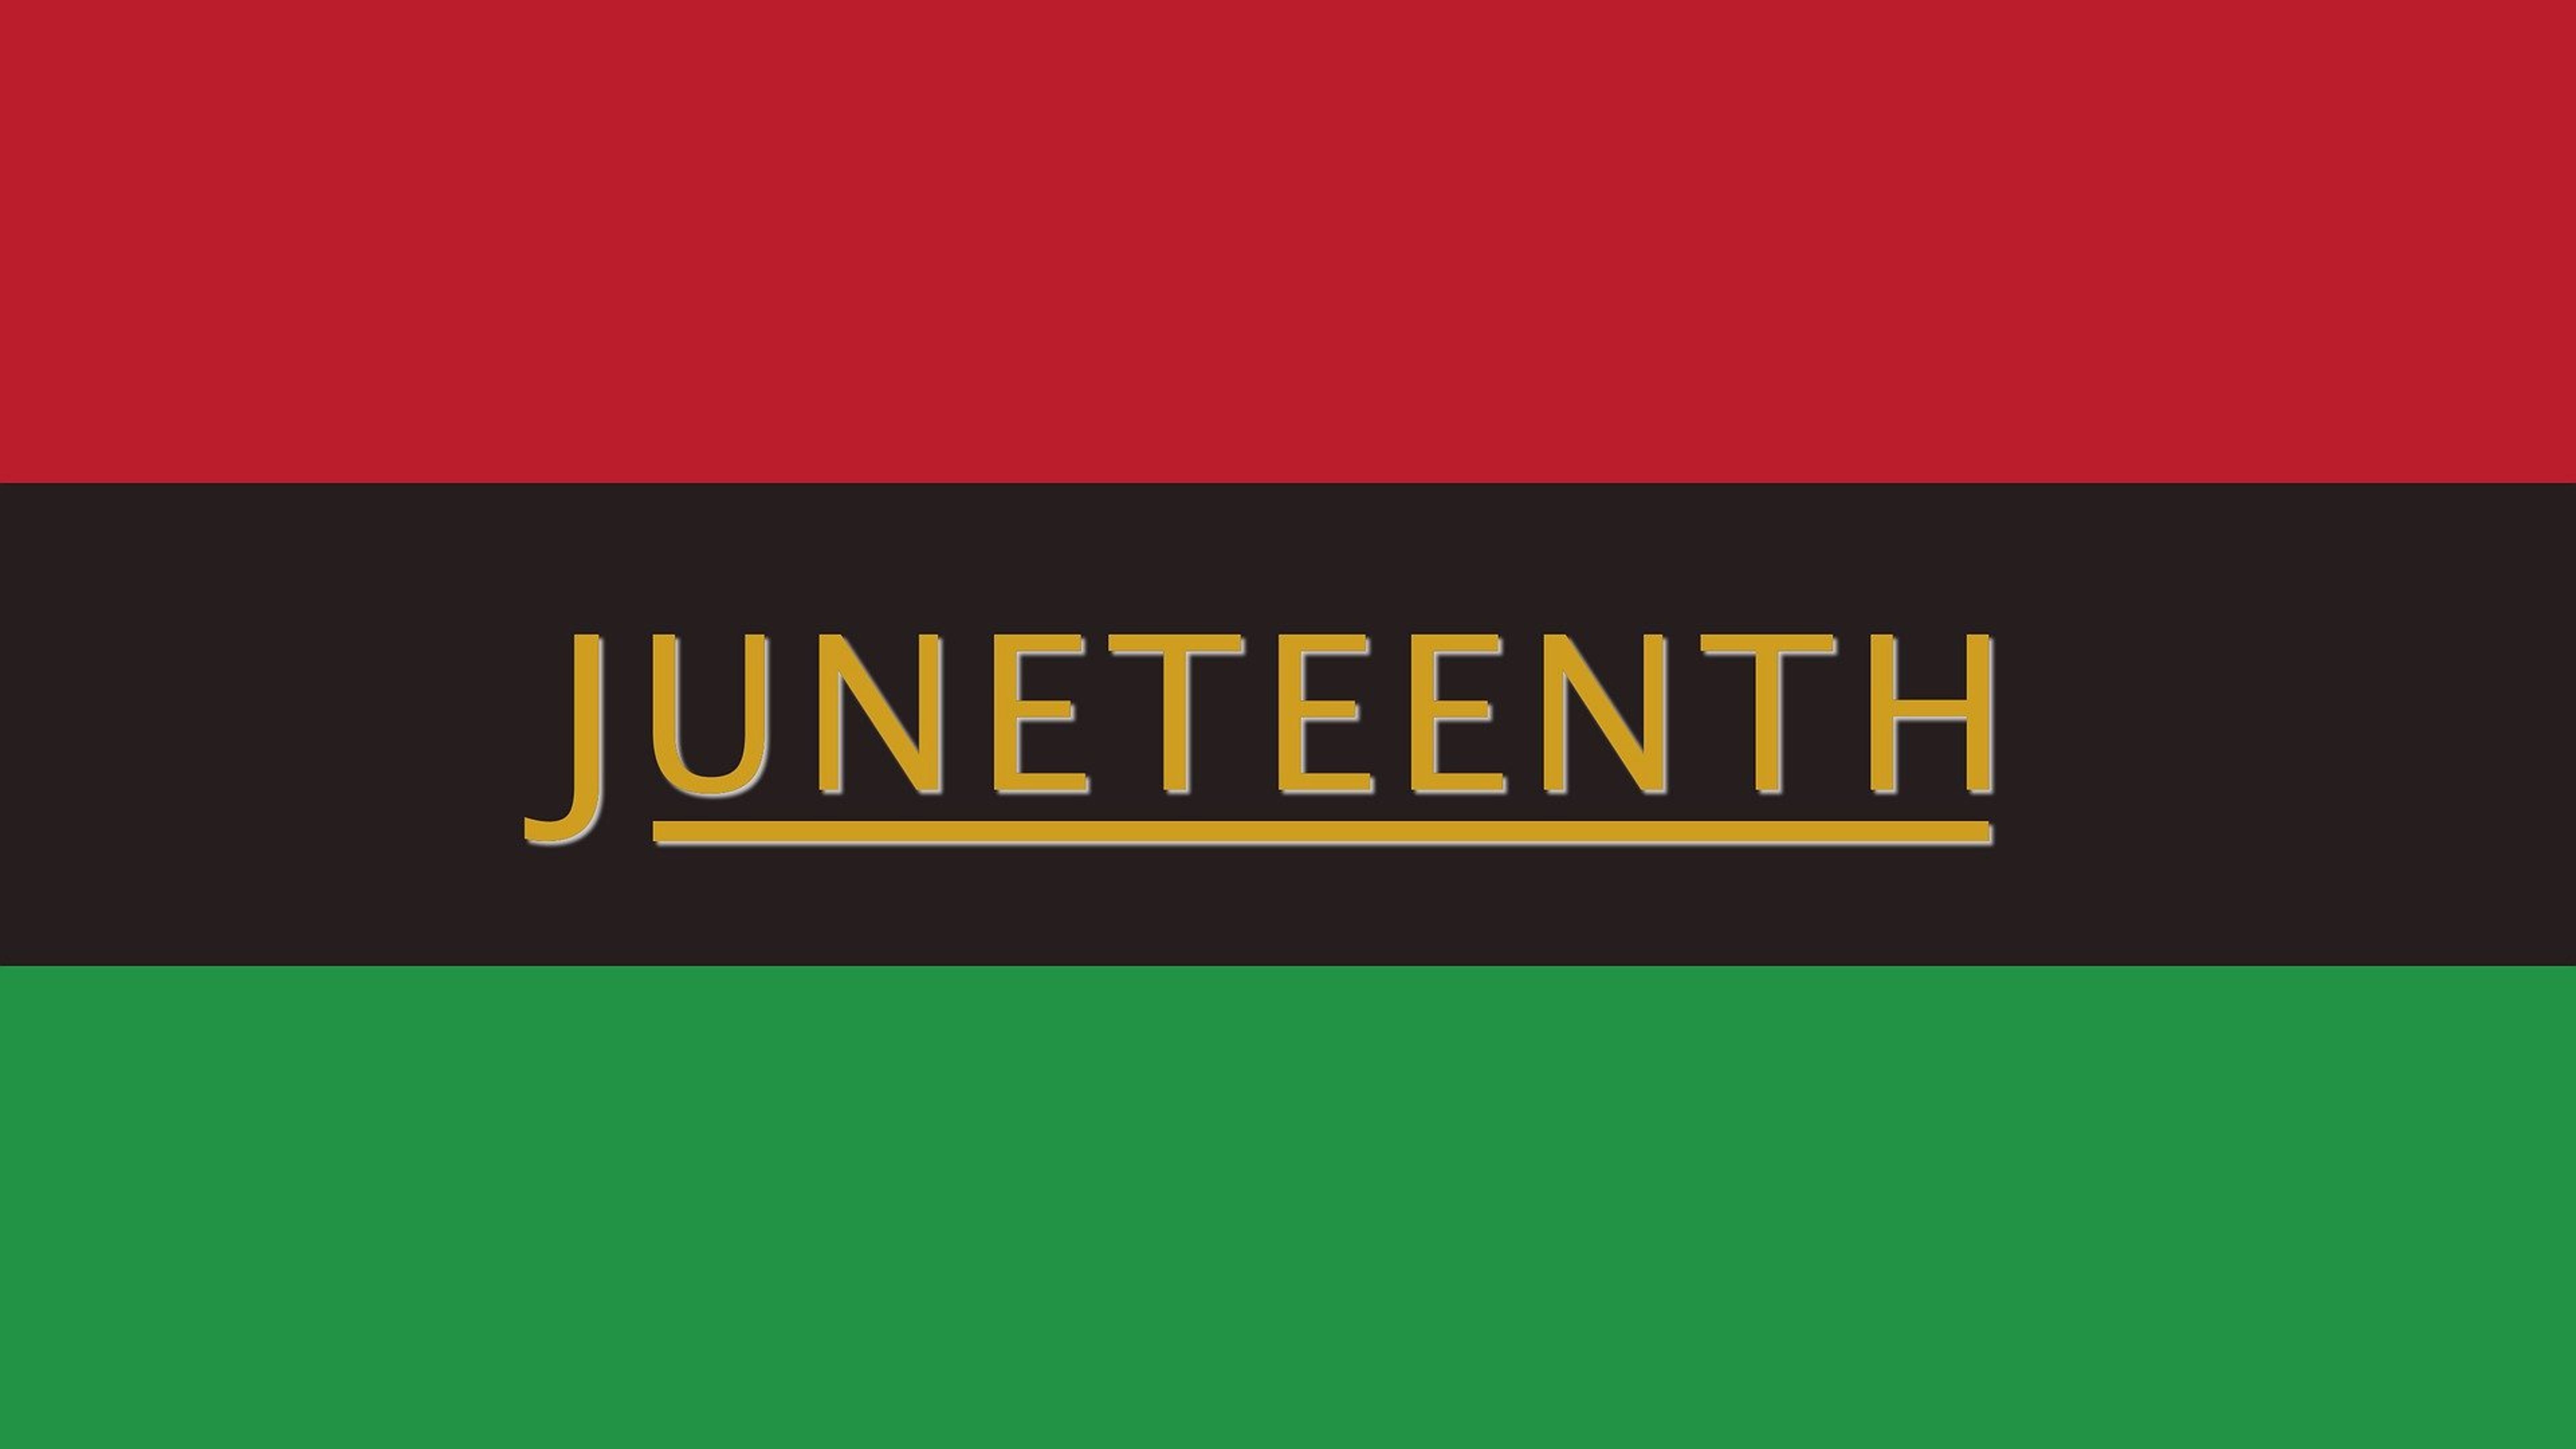 Juneteenth 2022: What&#39;s Open, What&#39;s Closed And What Is The Holiday All About?